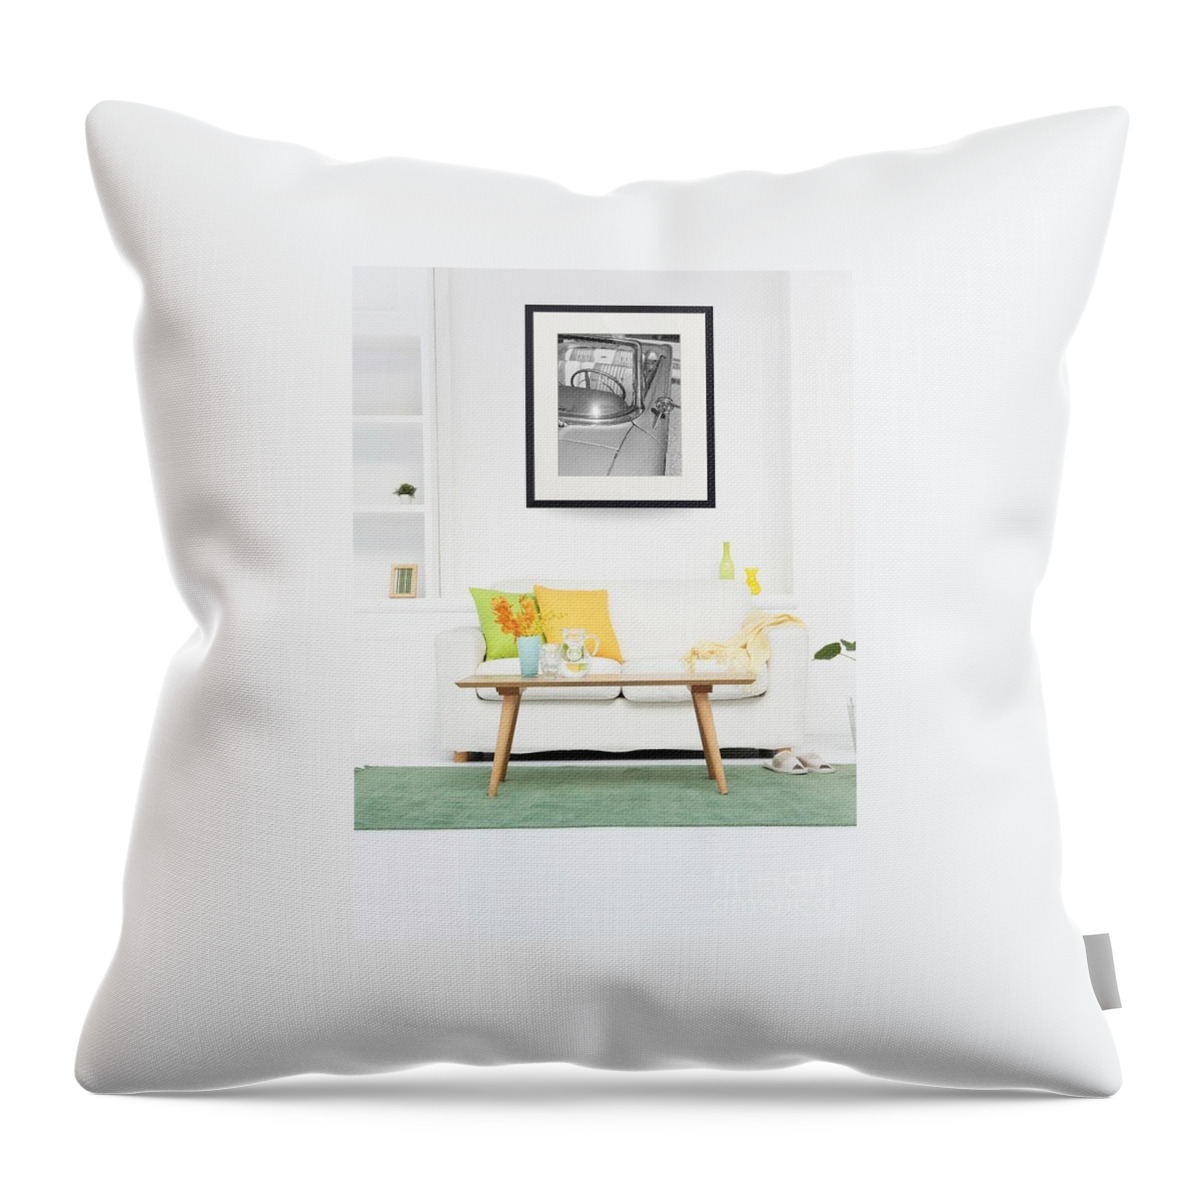 Home Throw Pillow featuring the photograph Vintage Convertible Example by Edward Fielding